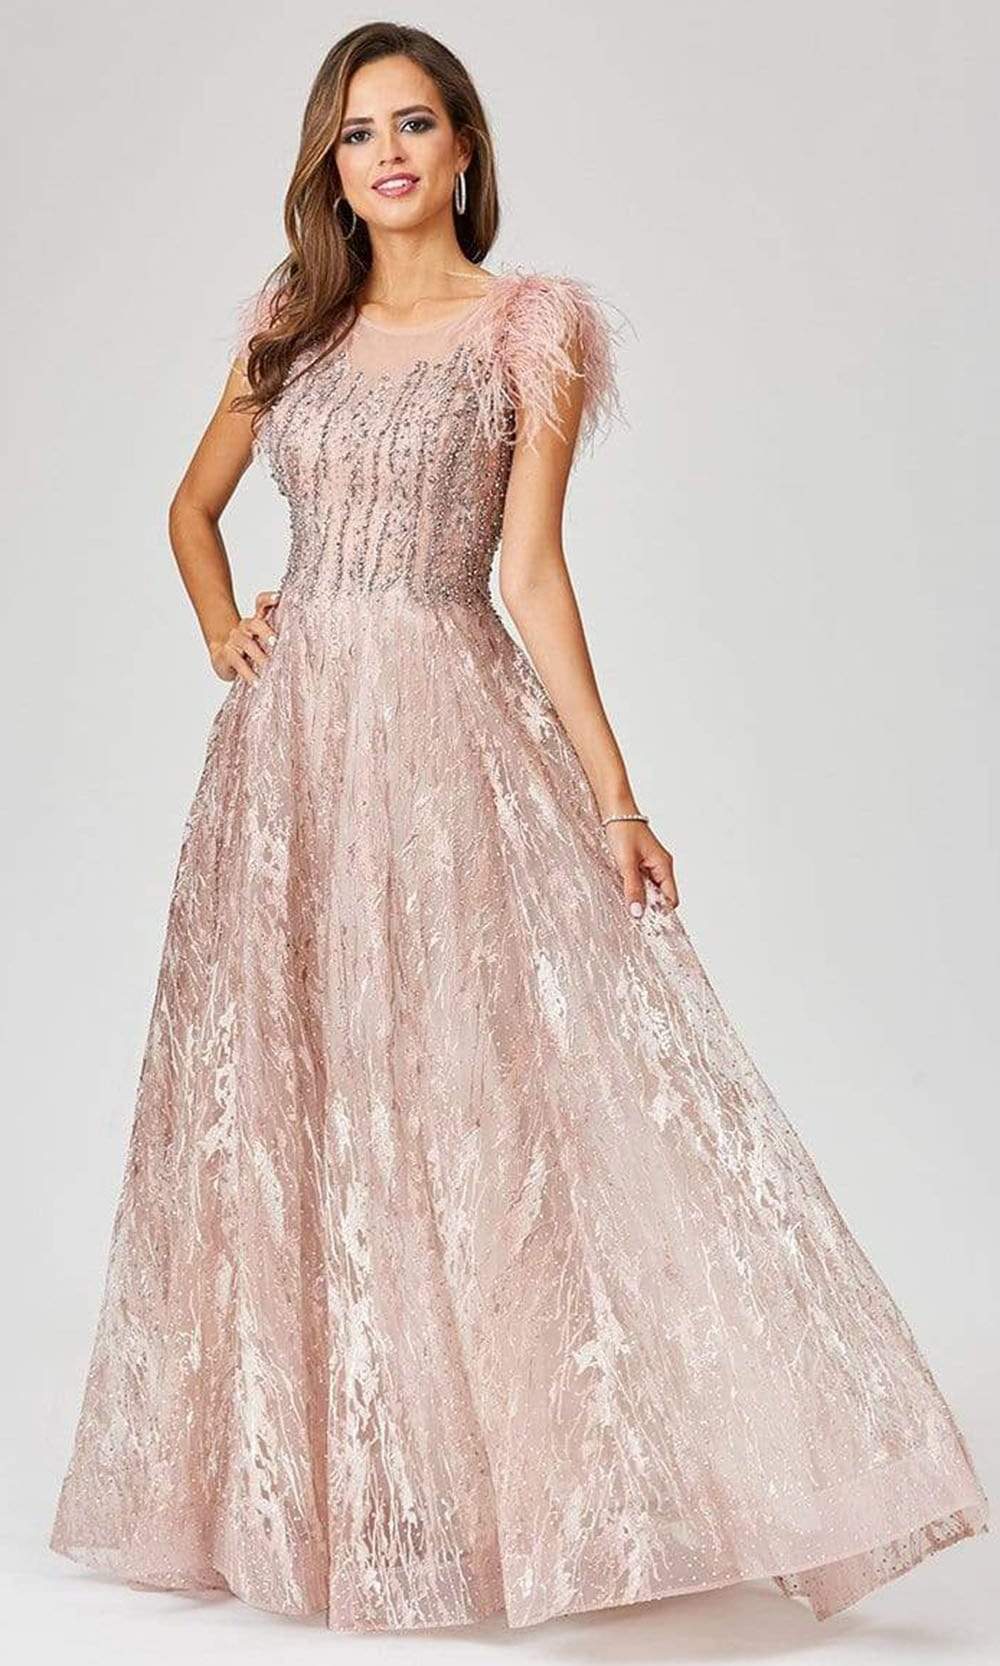 Image of Lara Dresses - 29475 Feather-Fringed Cap Sleeve Embroidered Gown